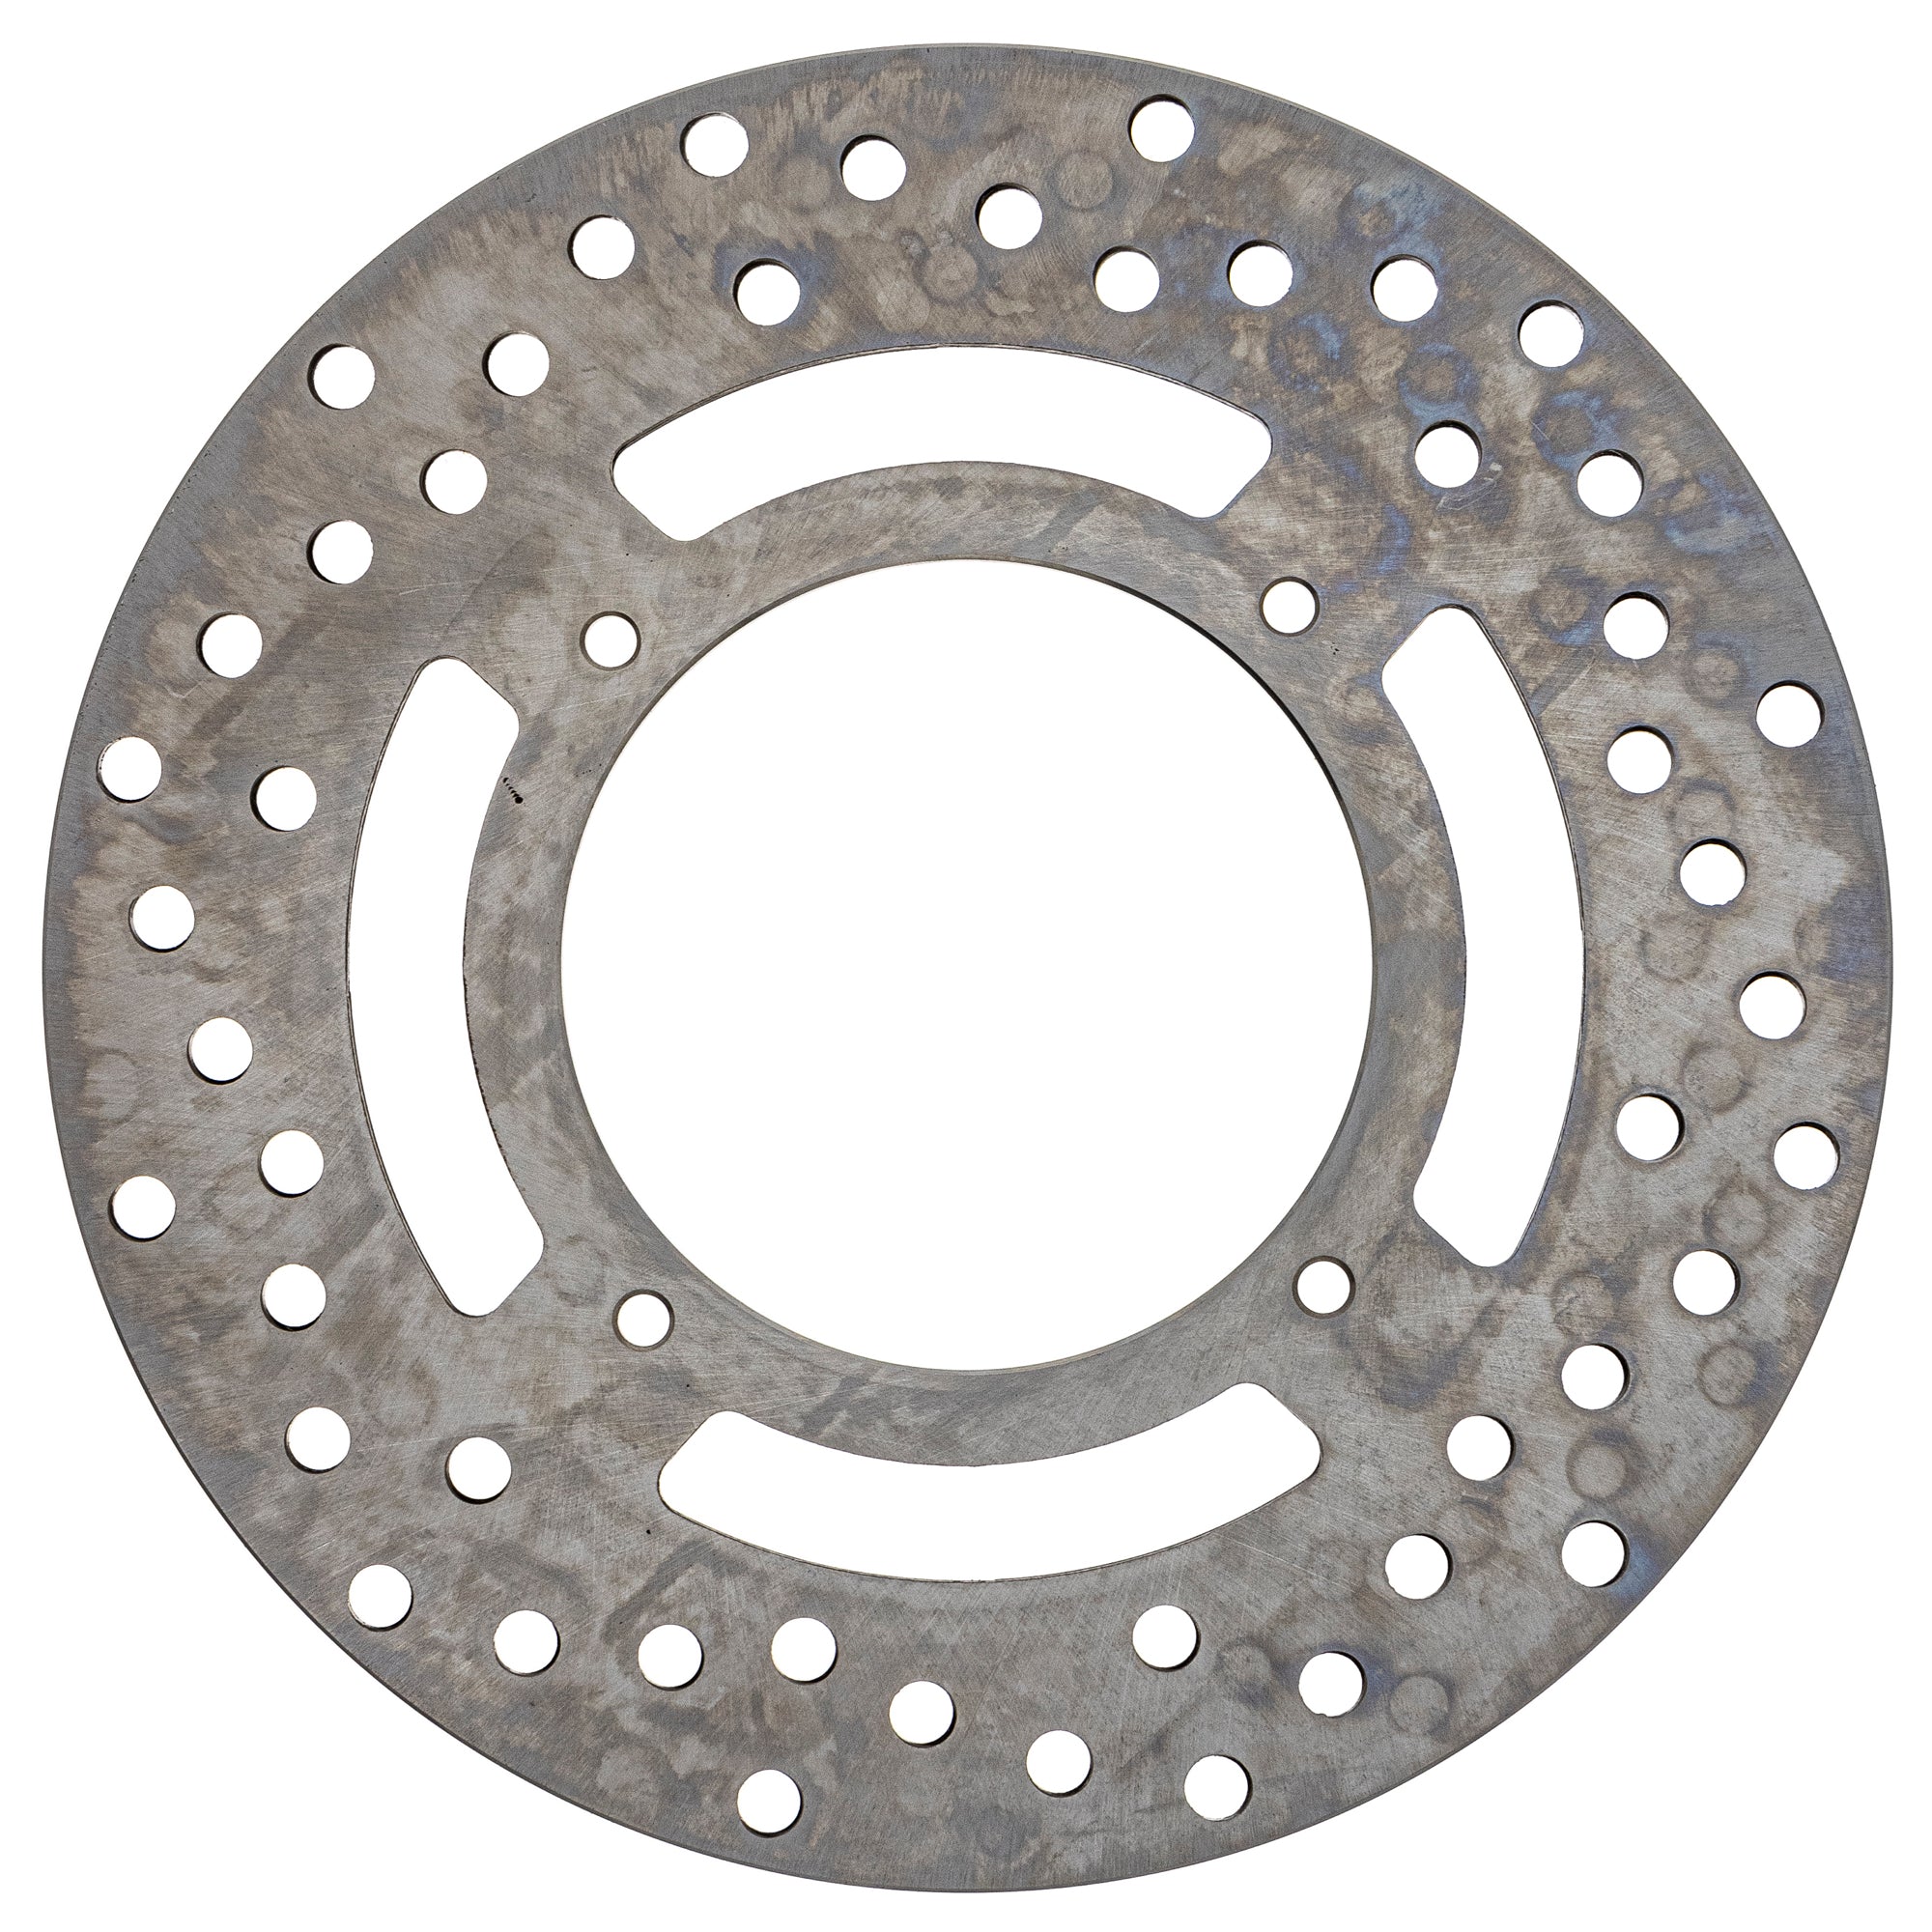 Rear Brake Rotor for zOTHER XR650R NICHE 519-CRT2532R